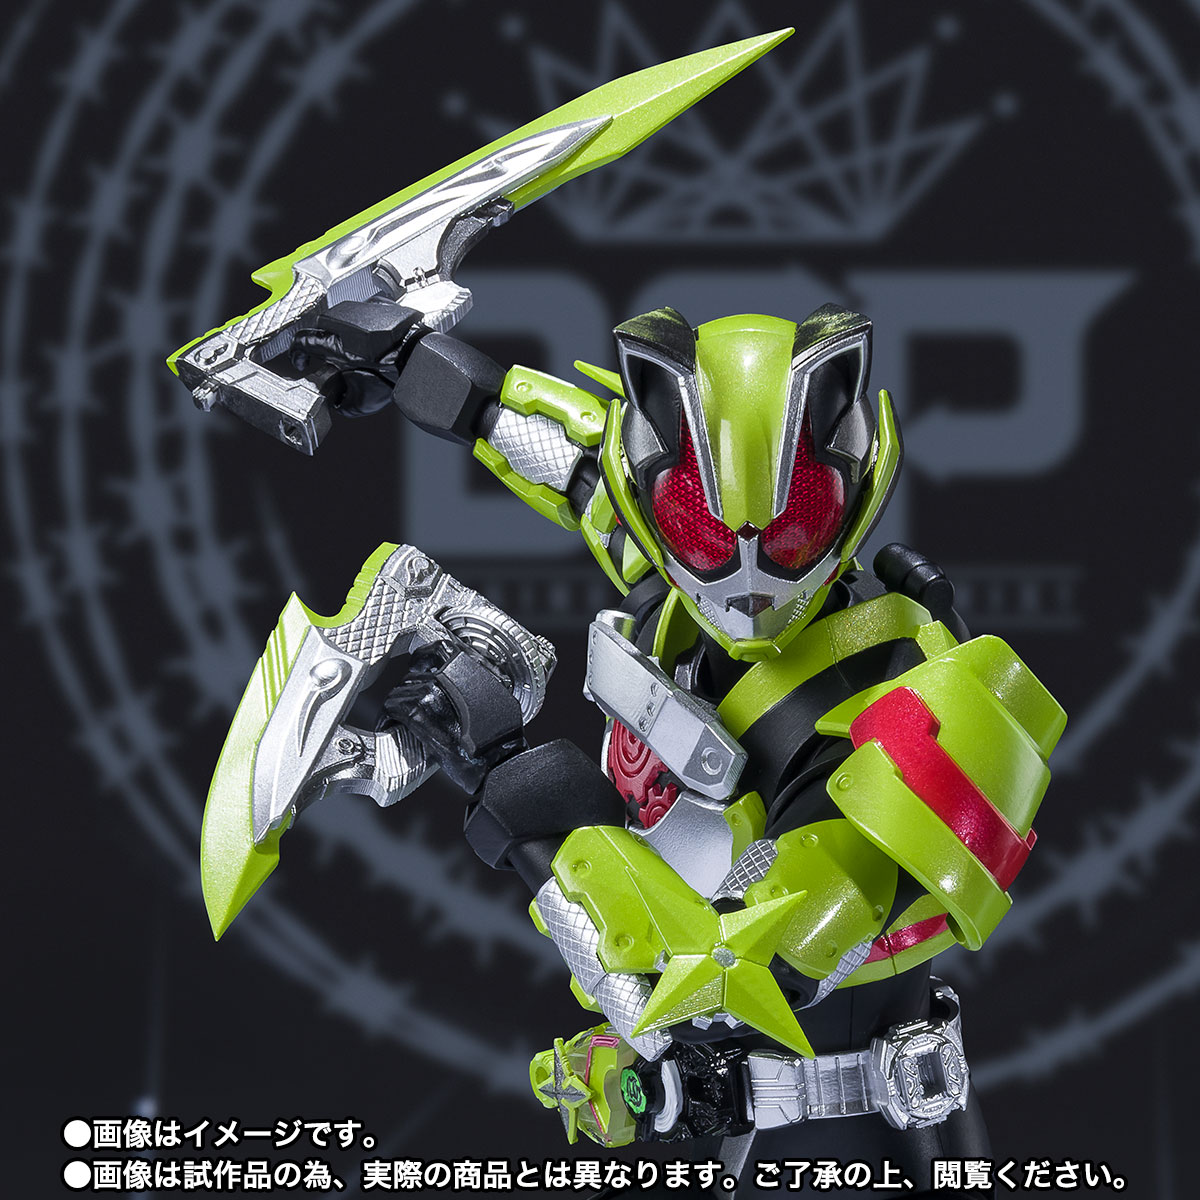 SH Figuarts Kamen Rider Tycoon Image and Release Details